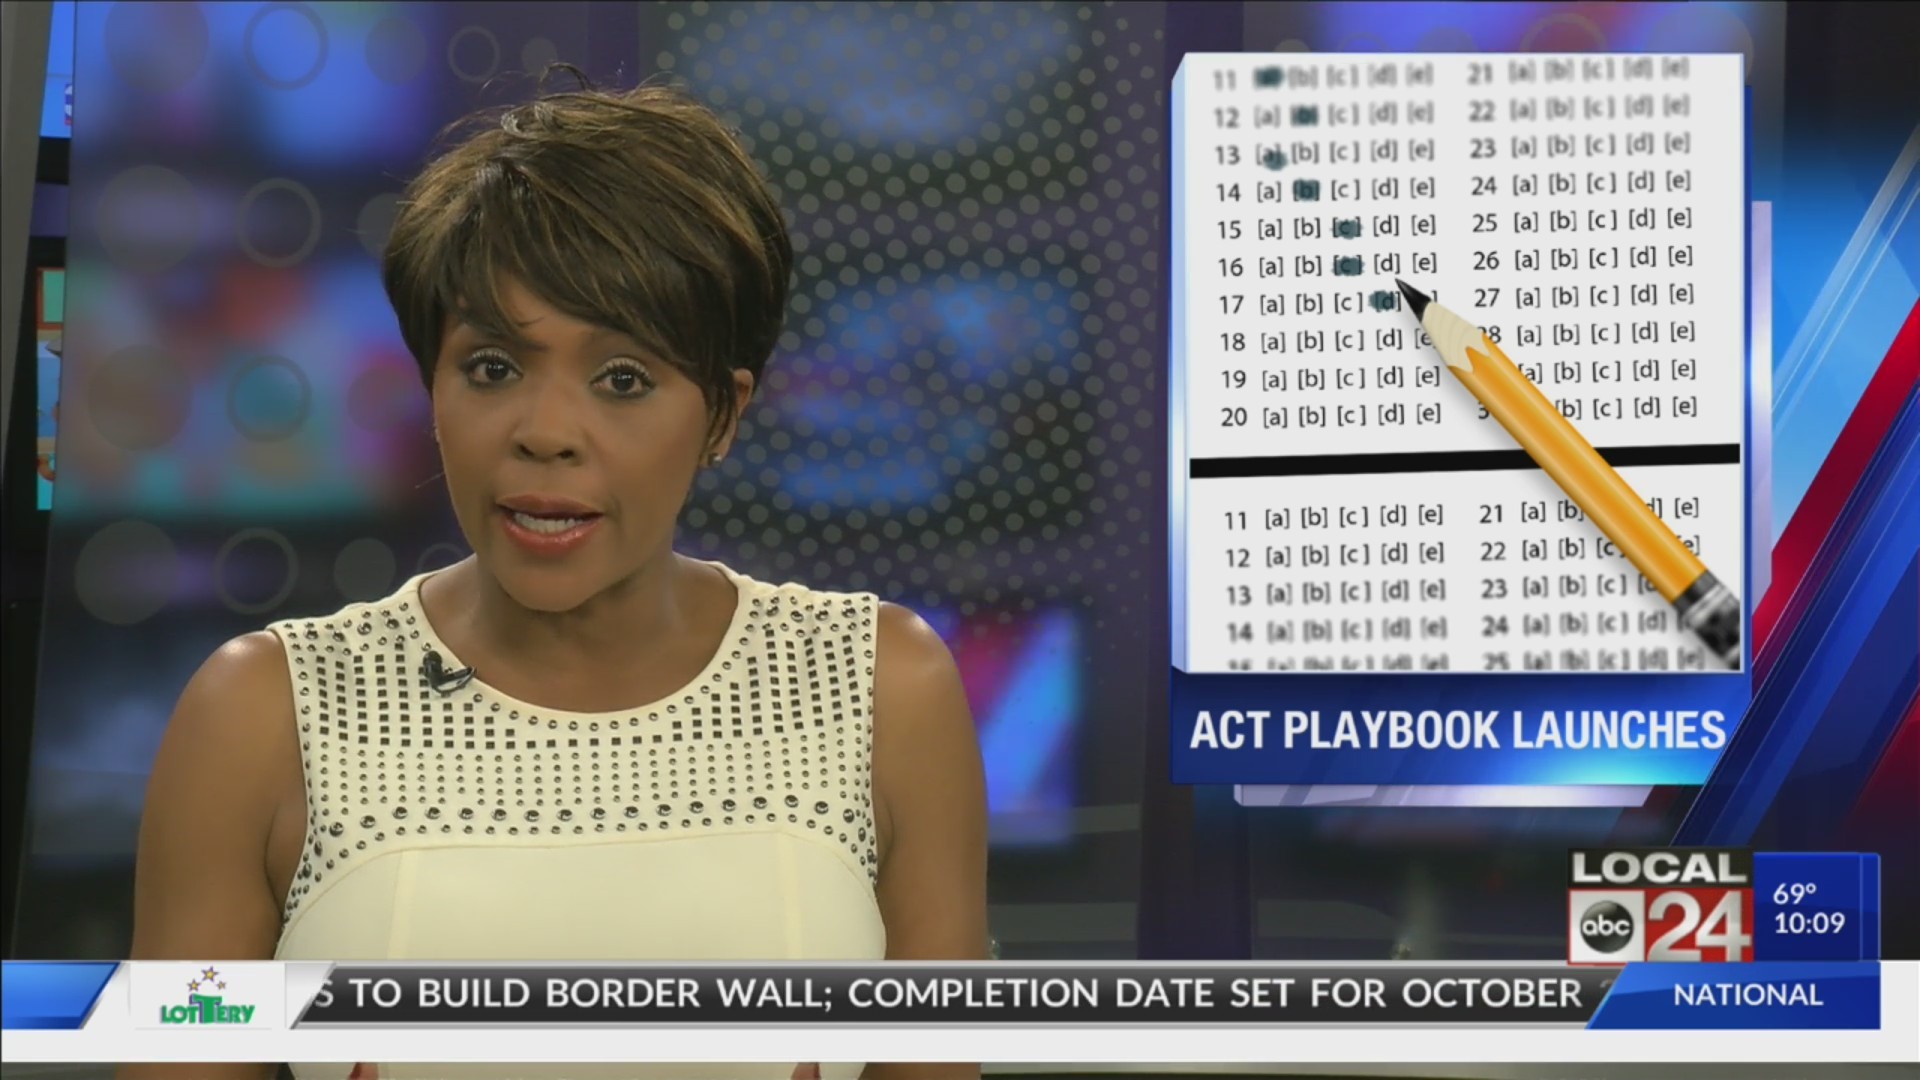 Shelby County Schools to give “ACT Playbook” to help prepare students